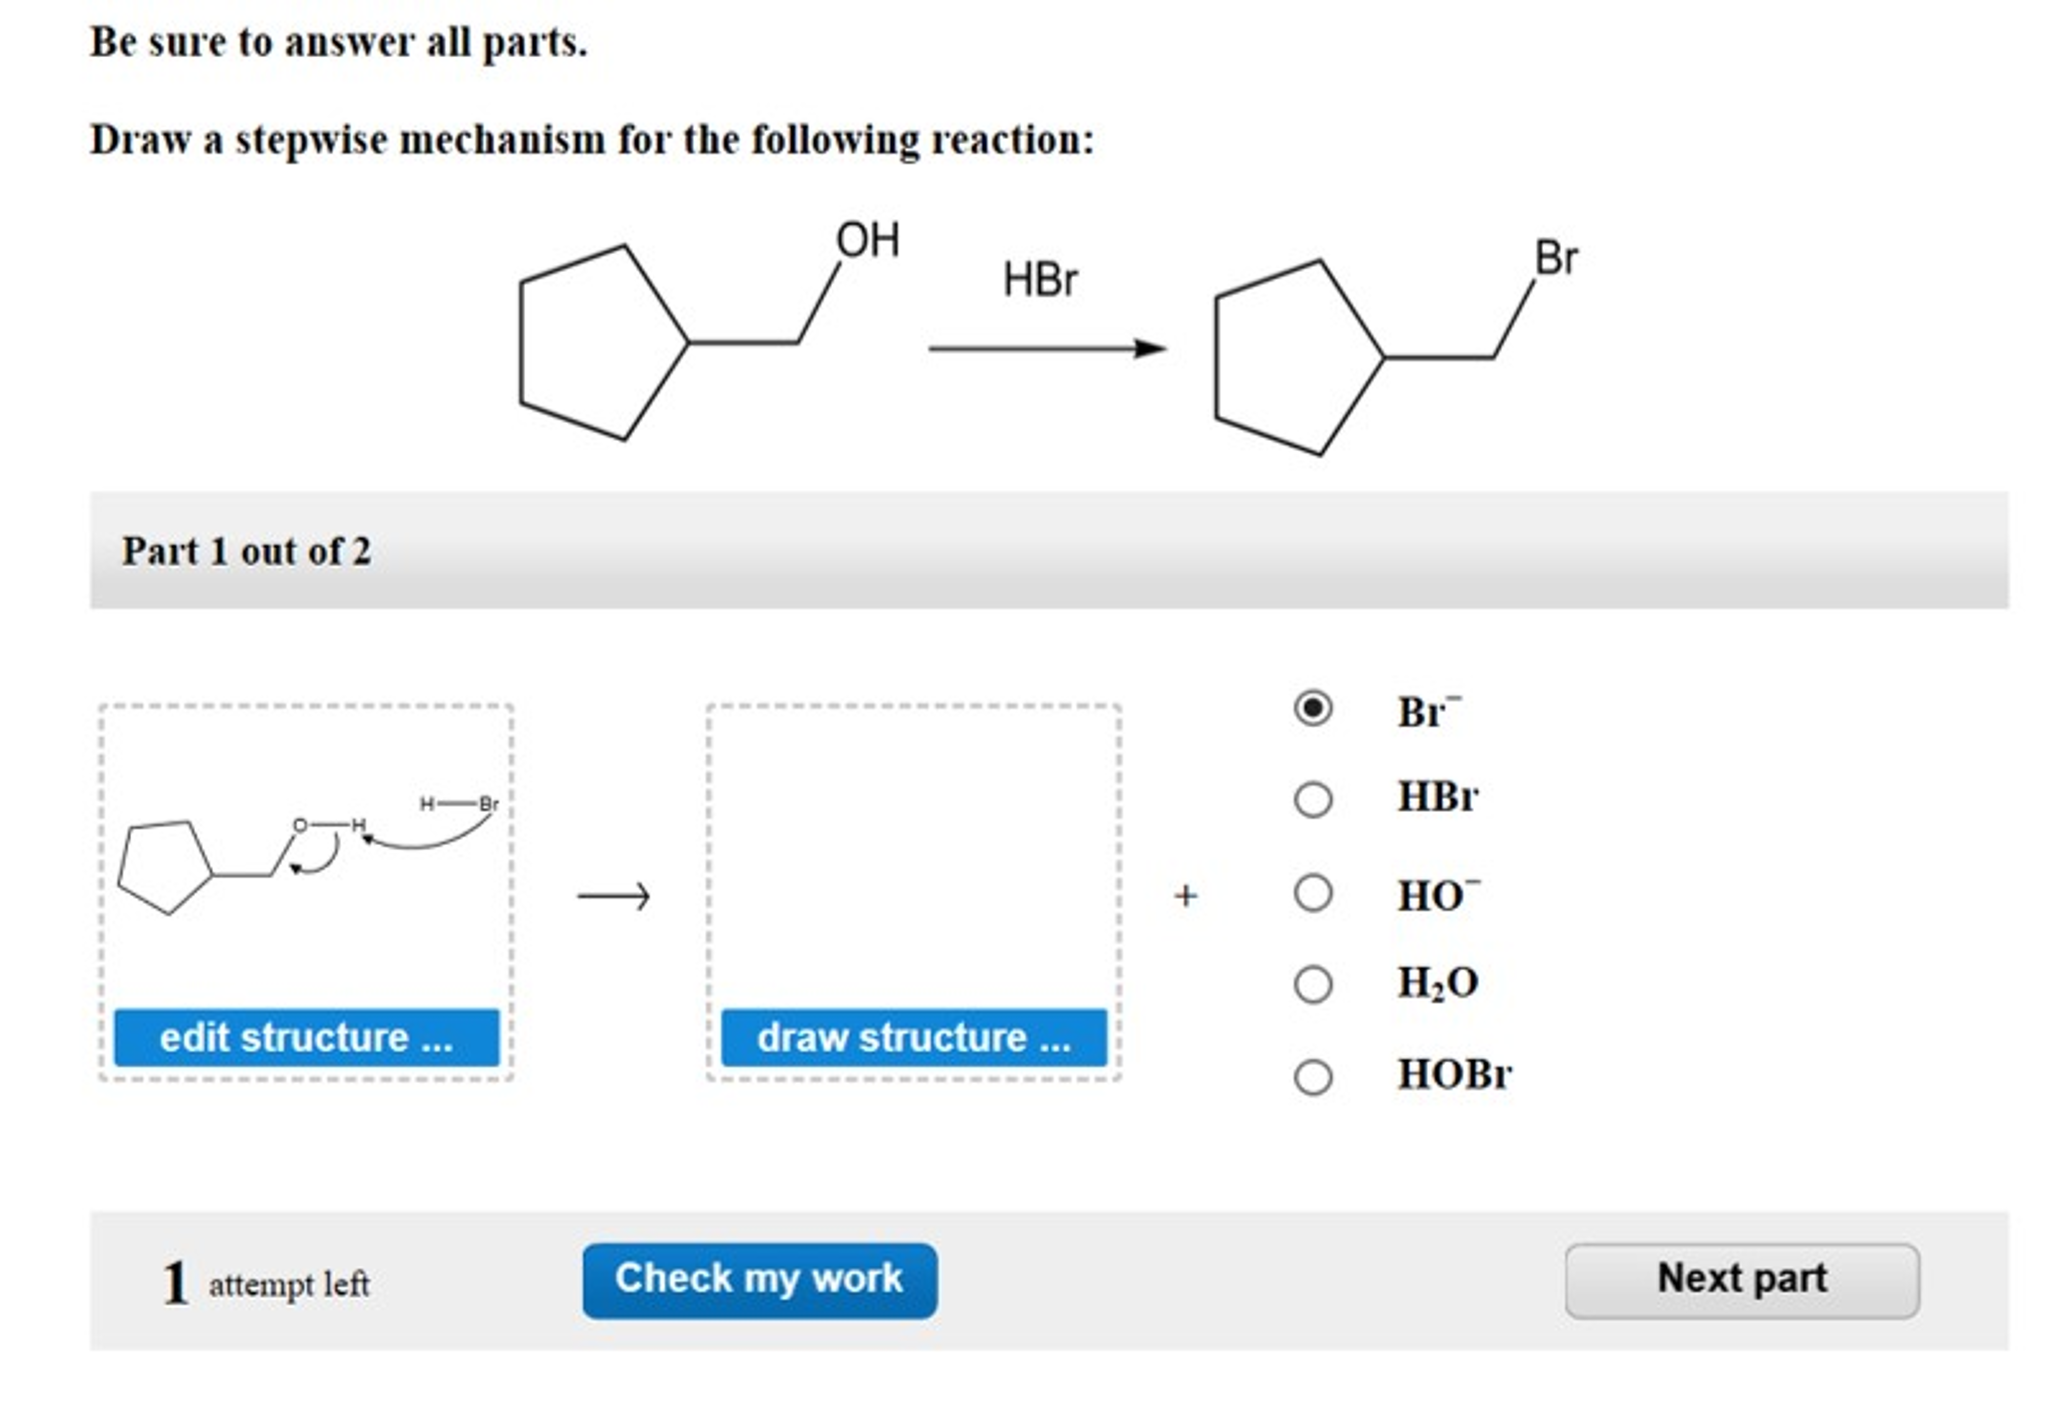 Draw a stepwise mechanism for the following reaction